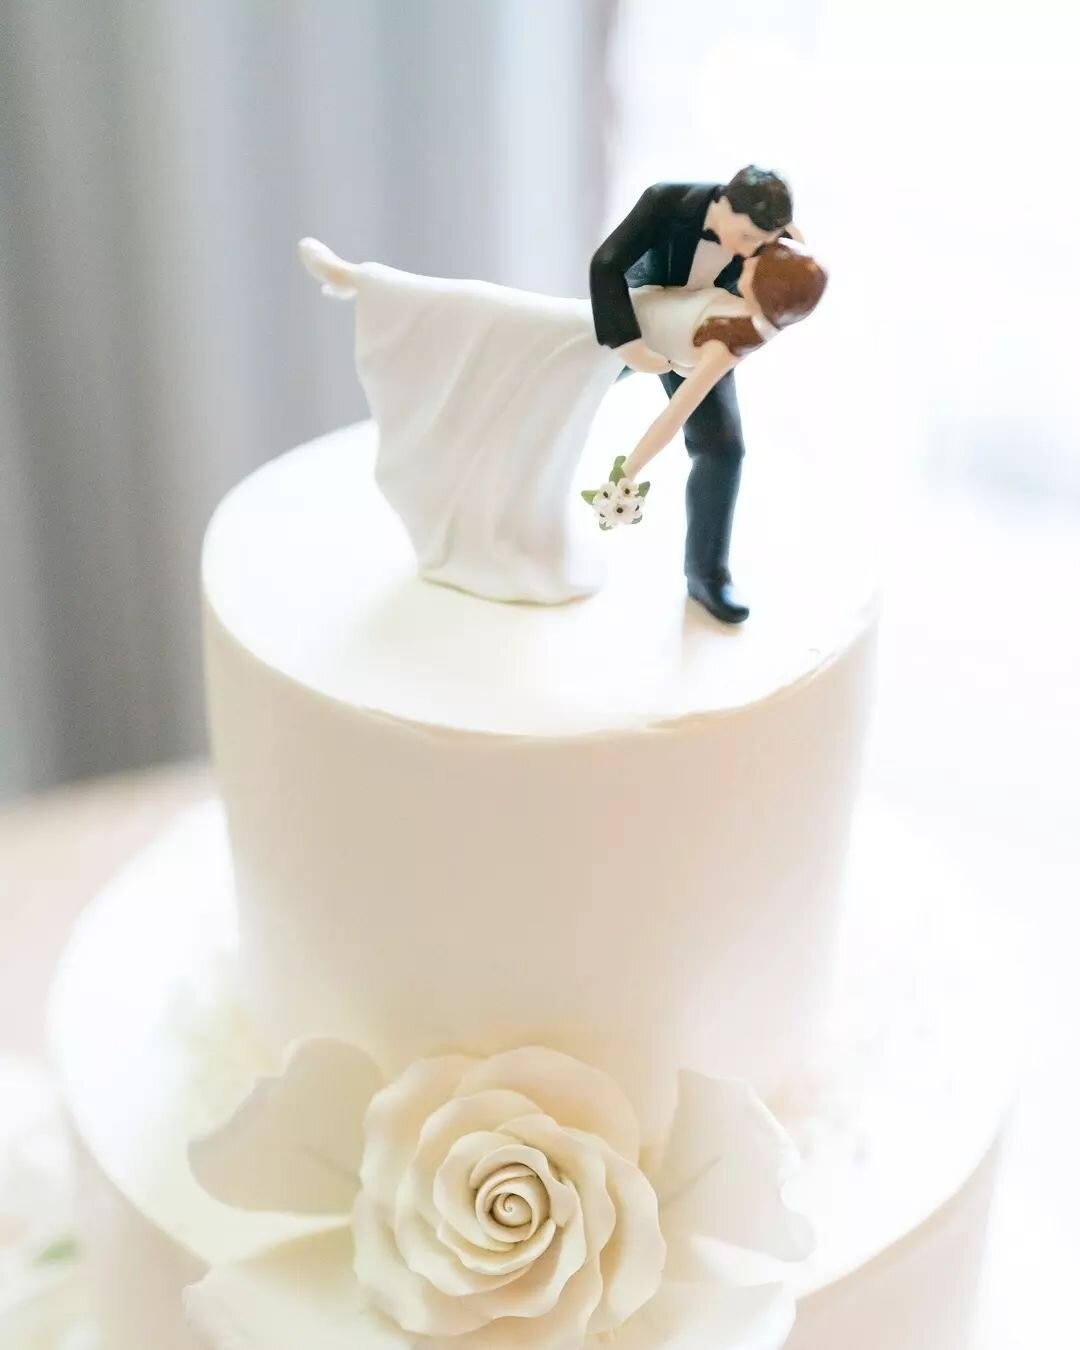 Let's talk about CAKE Baby! When you dream of your wedding cake what do you envision? Would you want a classic cake topper, maybe something a little more playful, what about fondant or buttercream, real flowers or sugar ones? Let us know in the comme